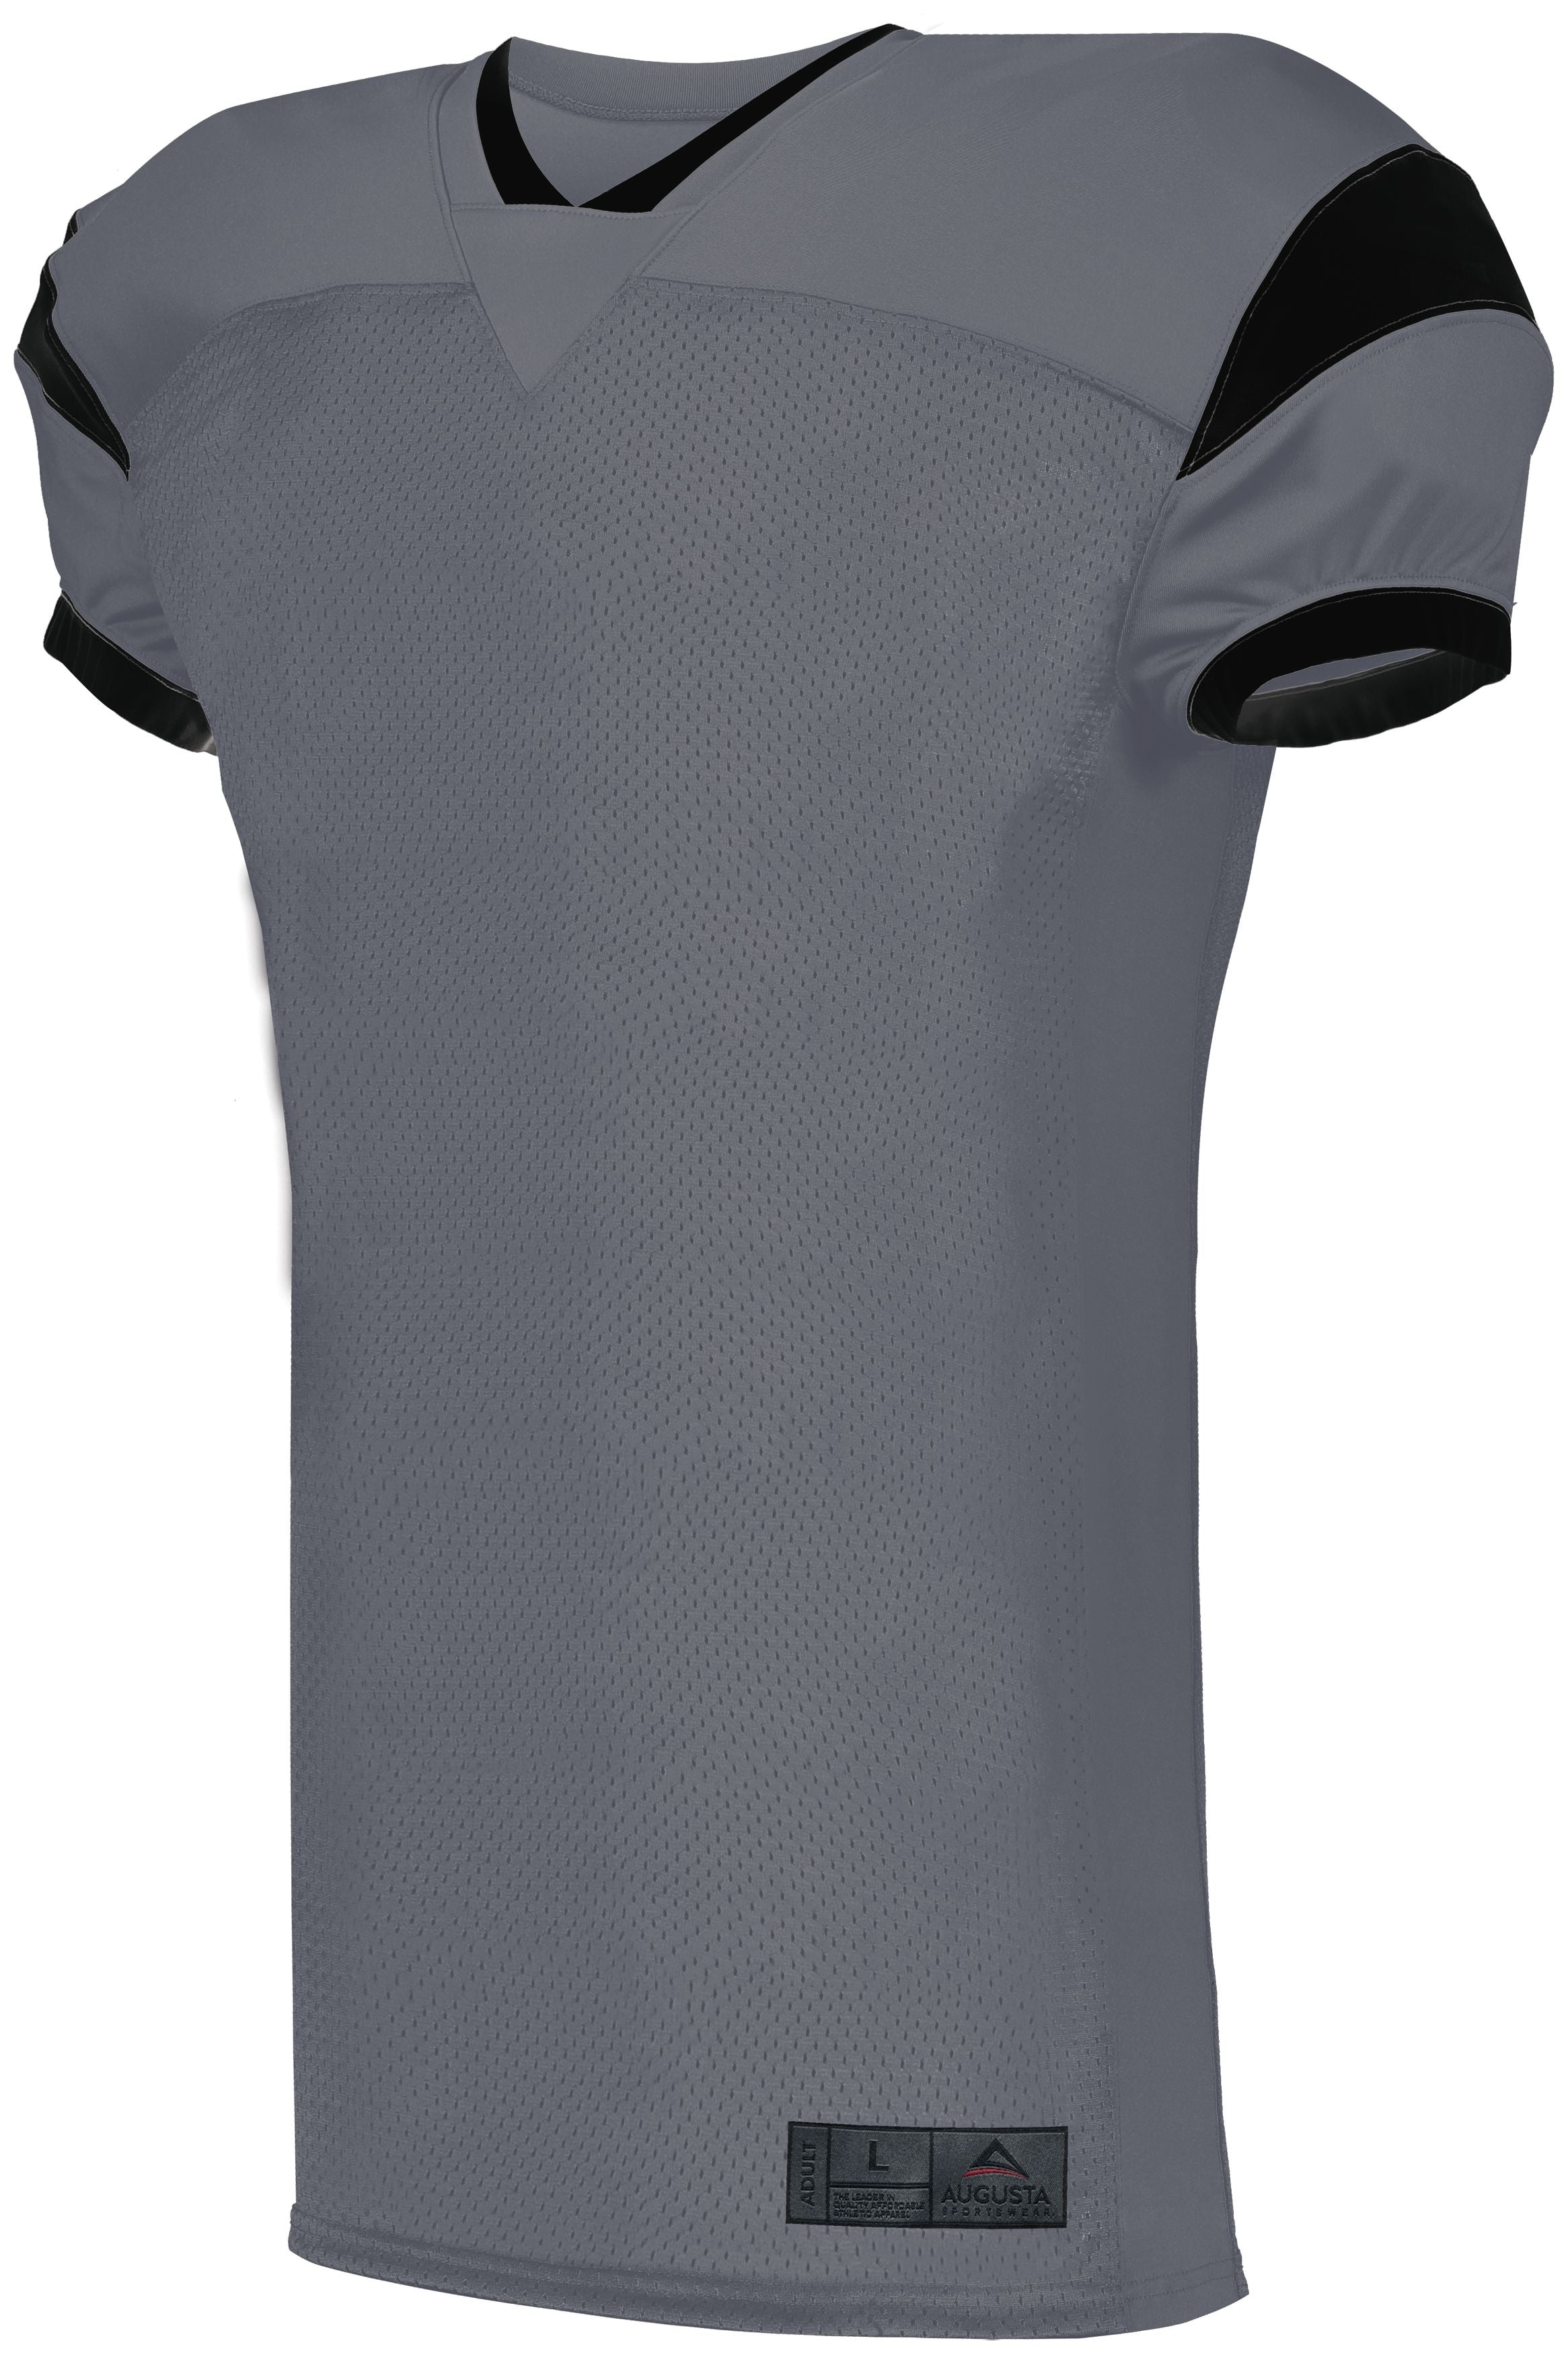 Augusta Sportswear Youth Slant Football Jersey in Graphite/Black  -Part of the Youth, Youth-Jersey, Augusta-Products, Football, Shirts, All-Sports, All-Sports-1 product lines at KanaleyCreations.com